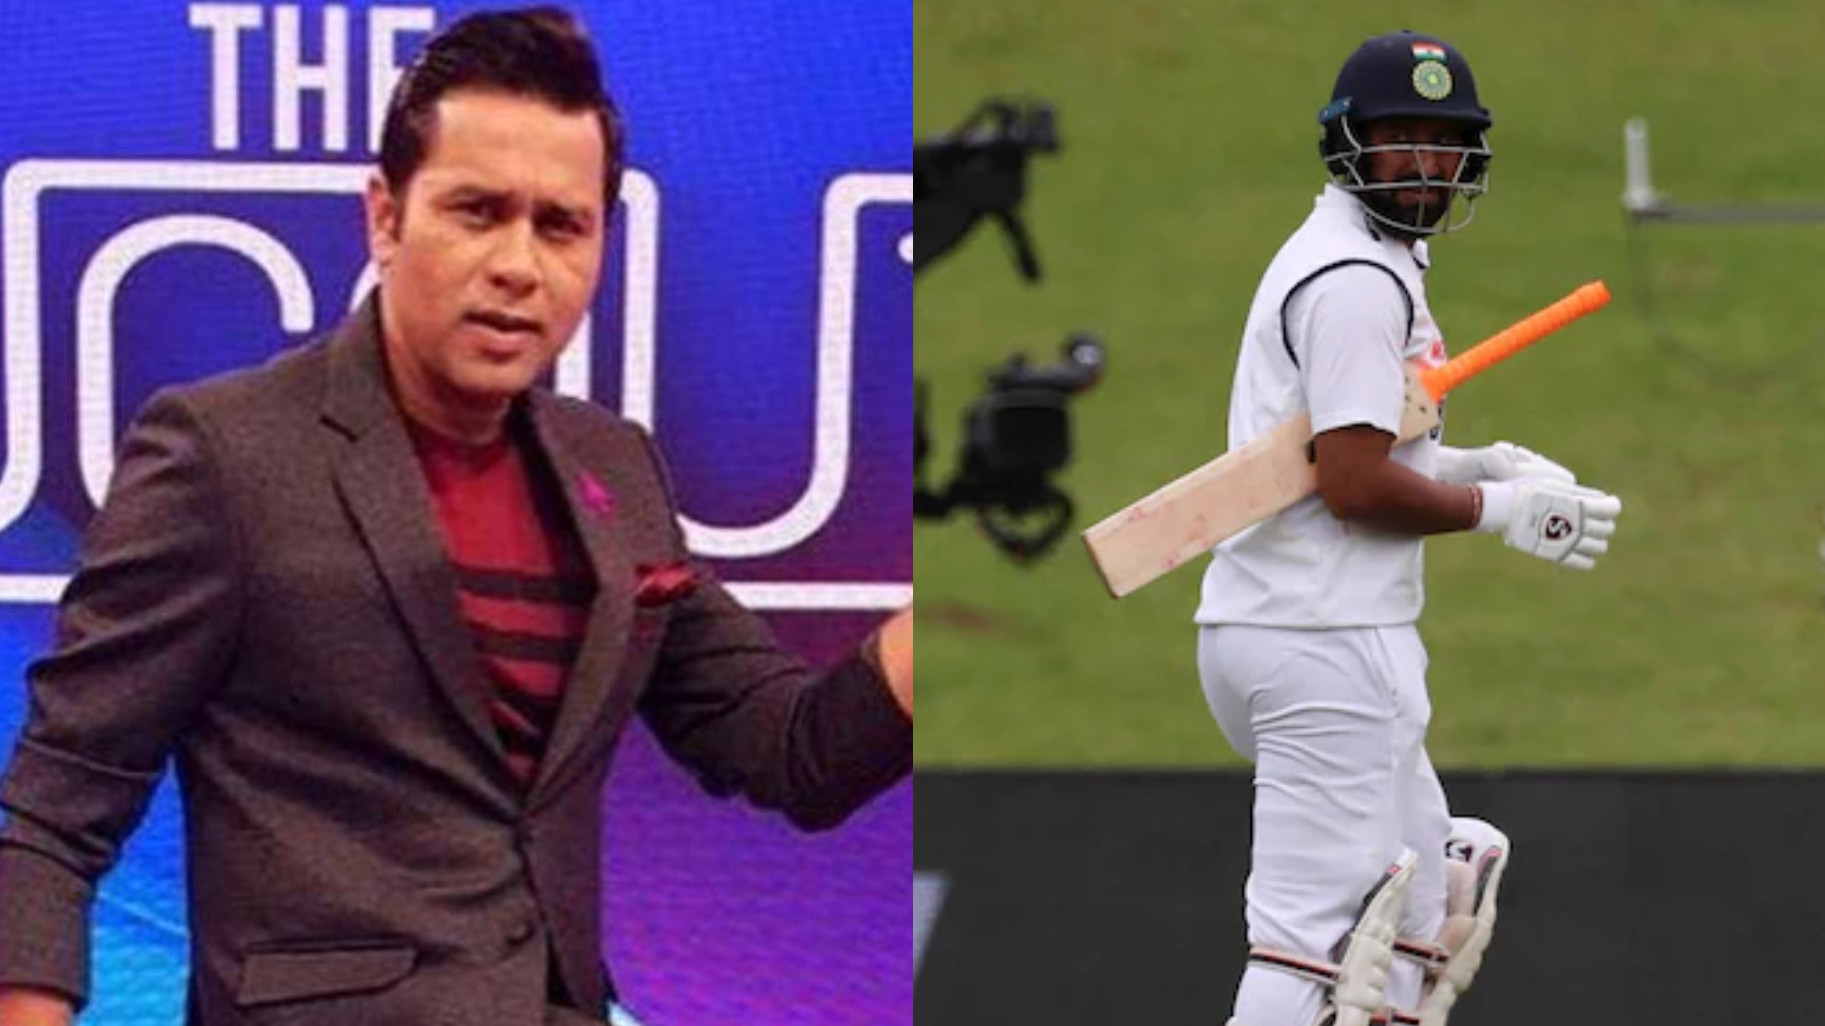 SA v IND 2021-22: Aakash Chopra says there is an uncanny pattern in Cheteshwar Pujara’s dismissals